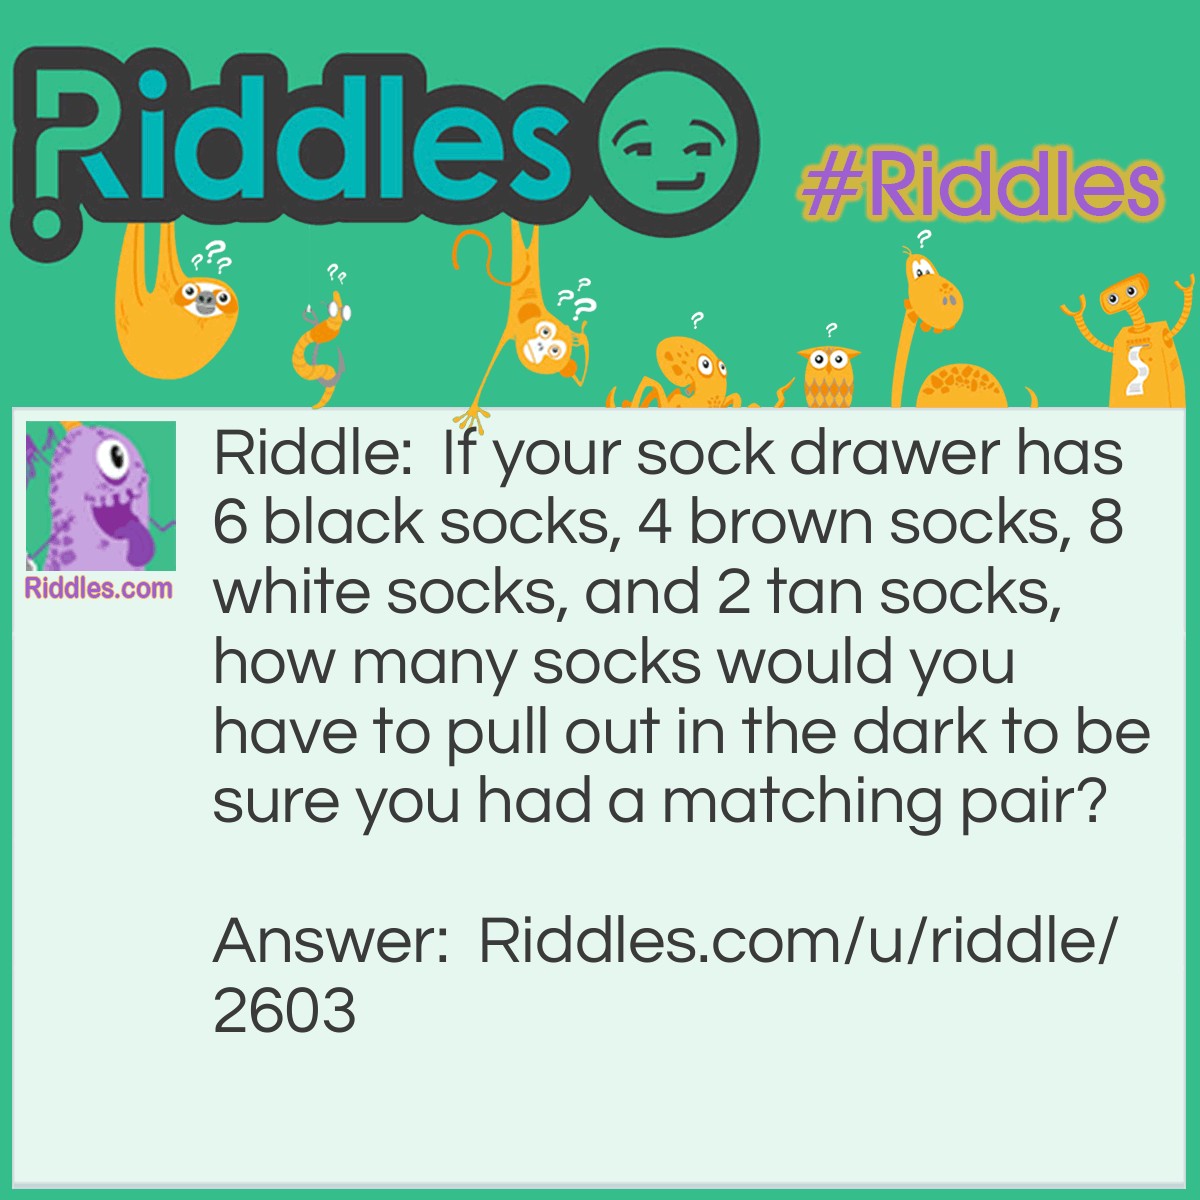 Riddle: If your sock drawer has 6 black socks, 4 brown socks, 8 white socks, and 2 tan socks, how many socks would you have to pull out in the dark to be sure you had a matching pair? Answer: Five. There are only four colors, so five socks guarantee that two will be the same color.